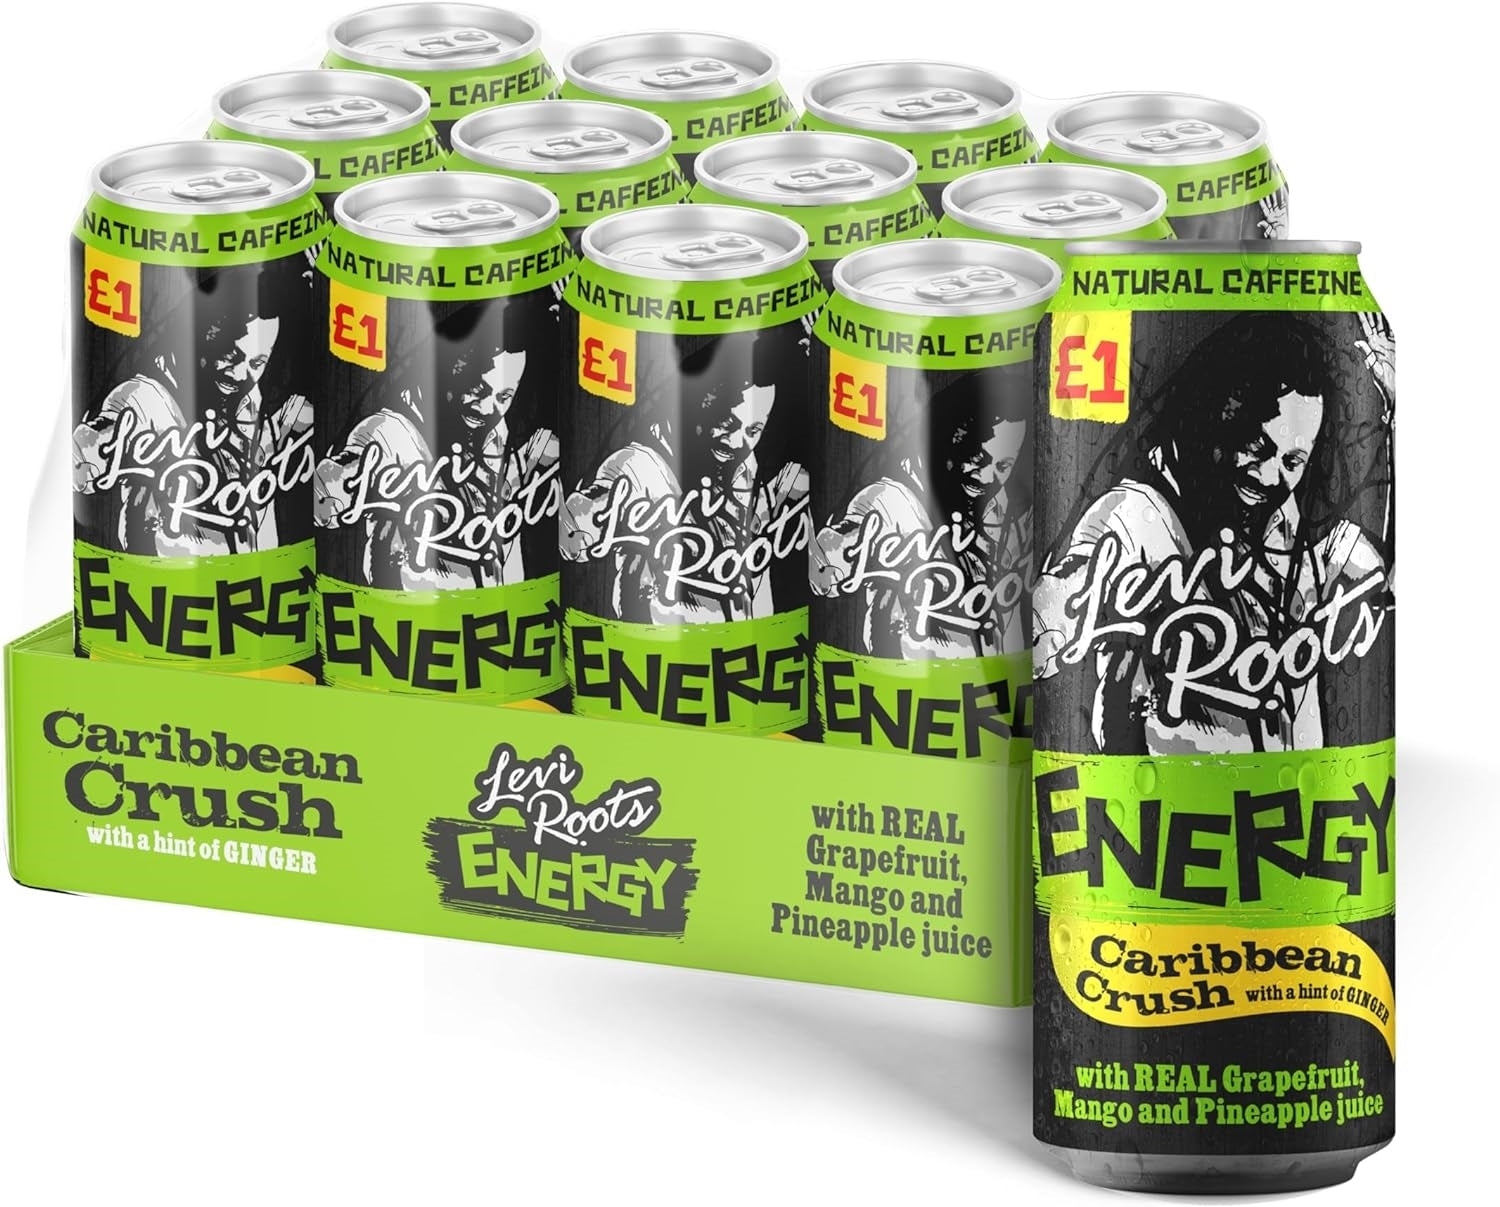 LEVI ROOTS ENERGY CARIBBEAN CRUSH CANS 500ML PM £1